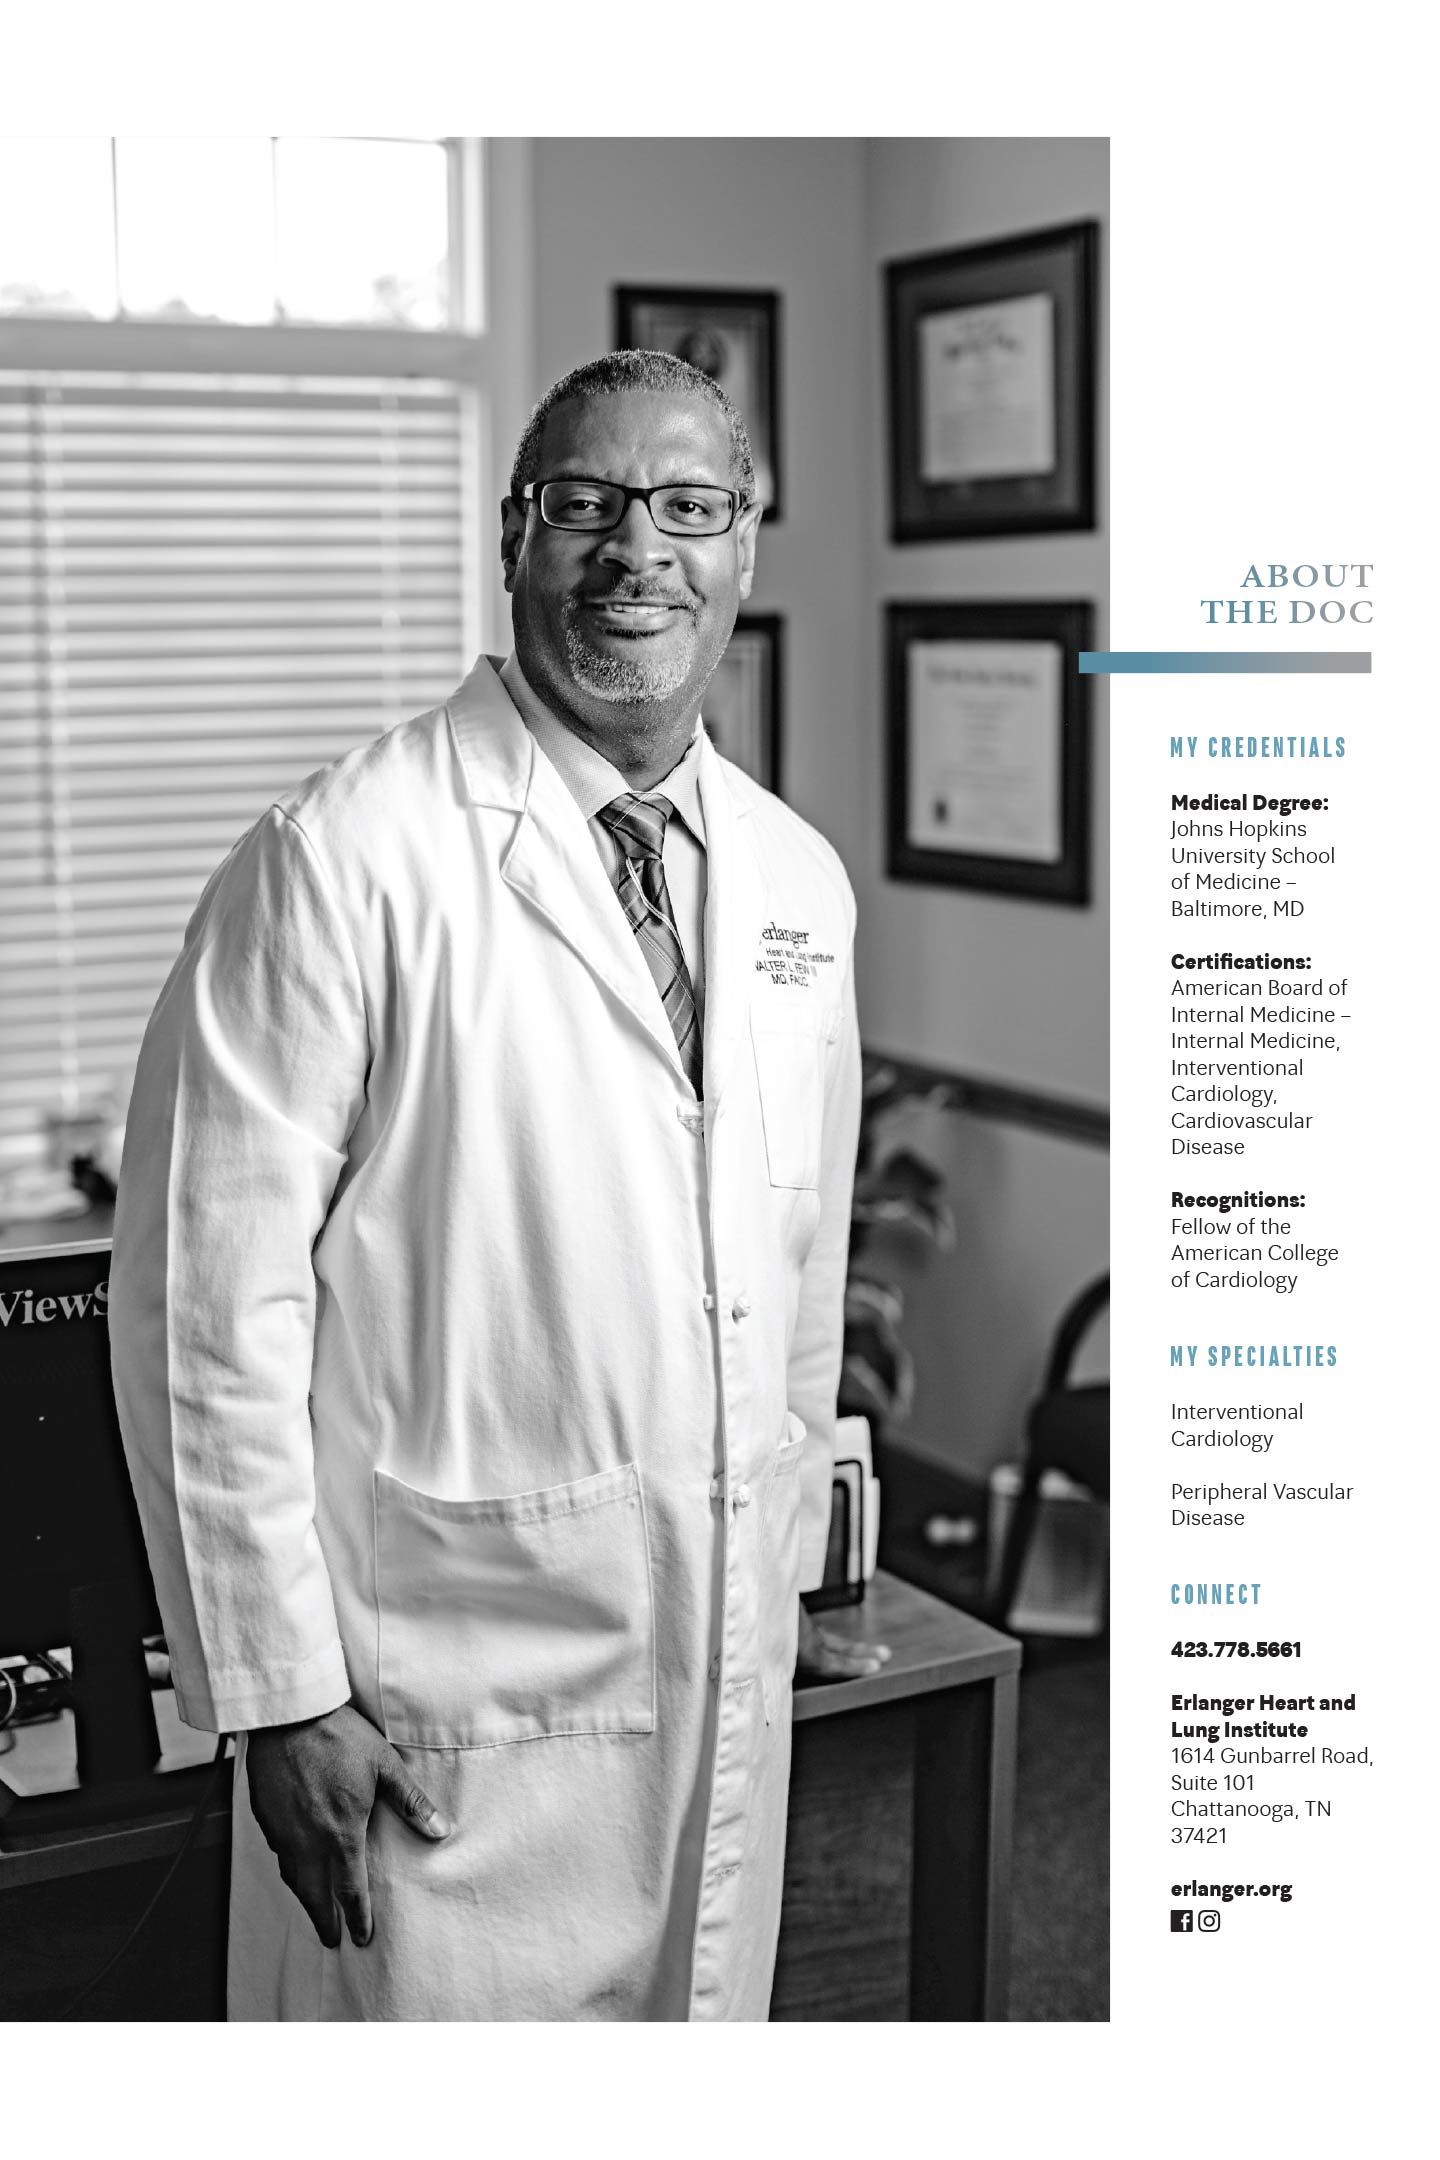 Dr. Walter L Few at Erlanger Heart and Lung institute in Chattanooga credentials specialties and contact info